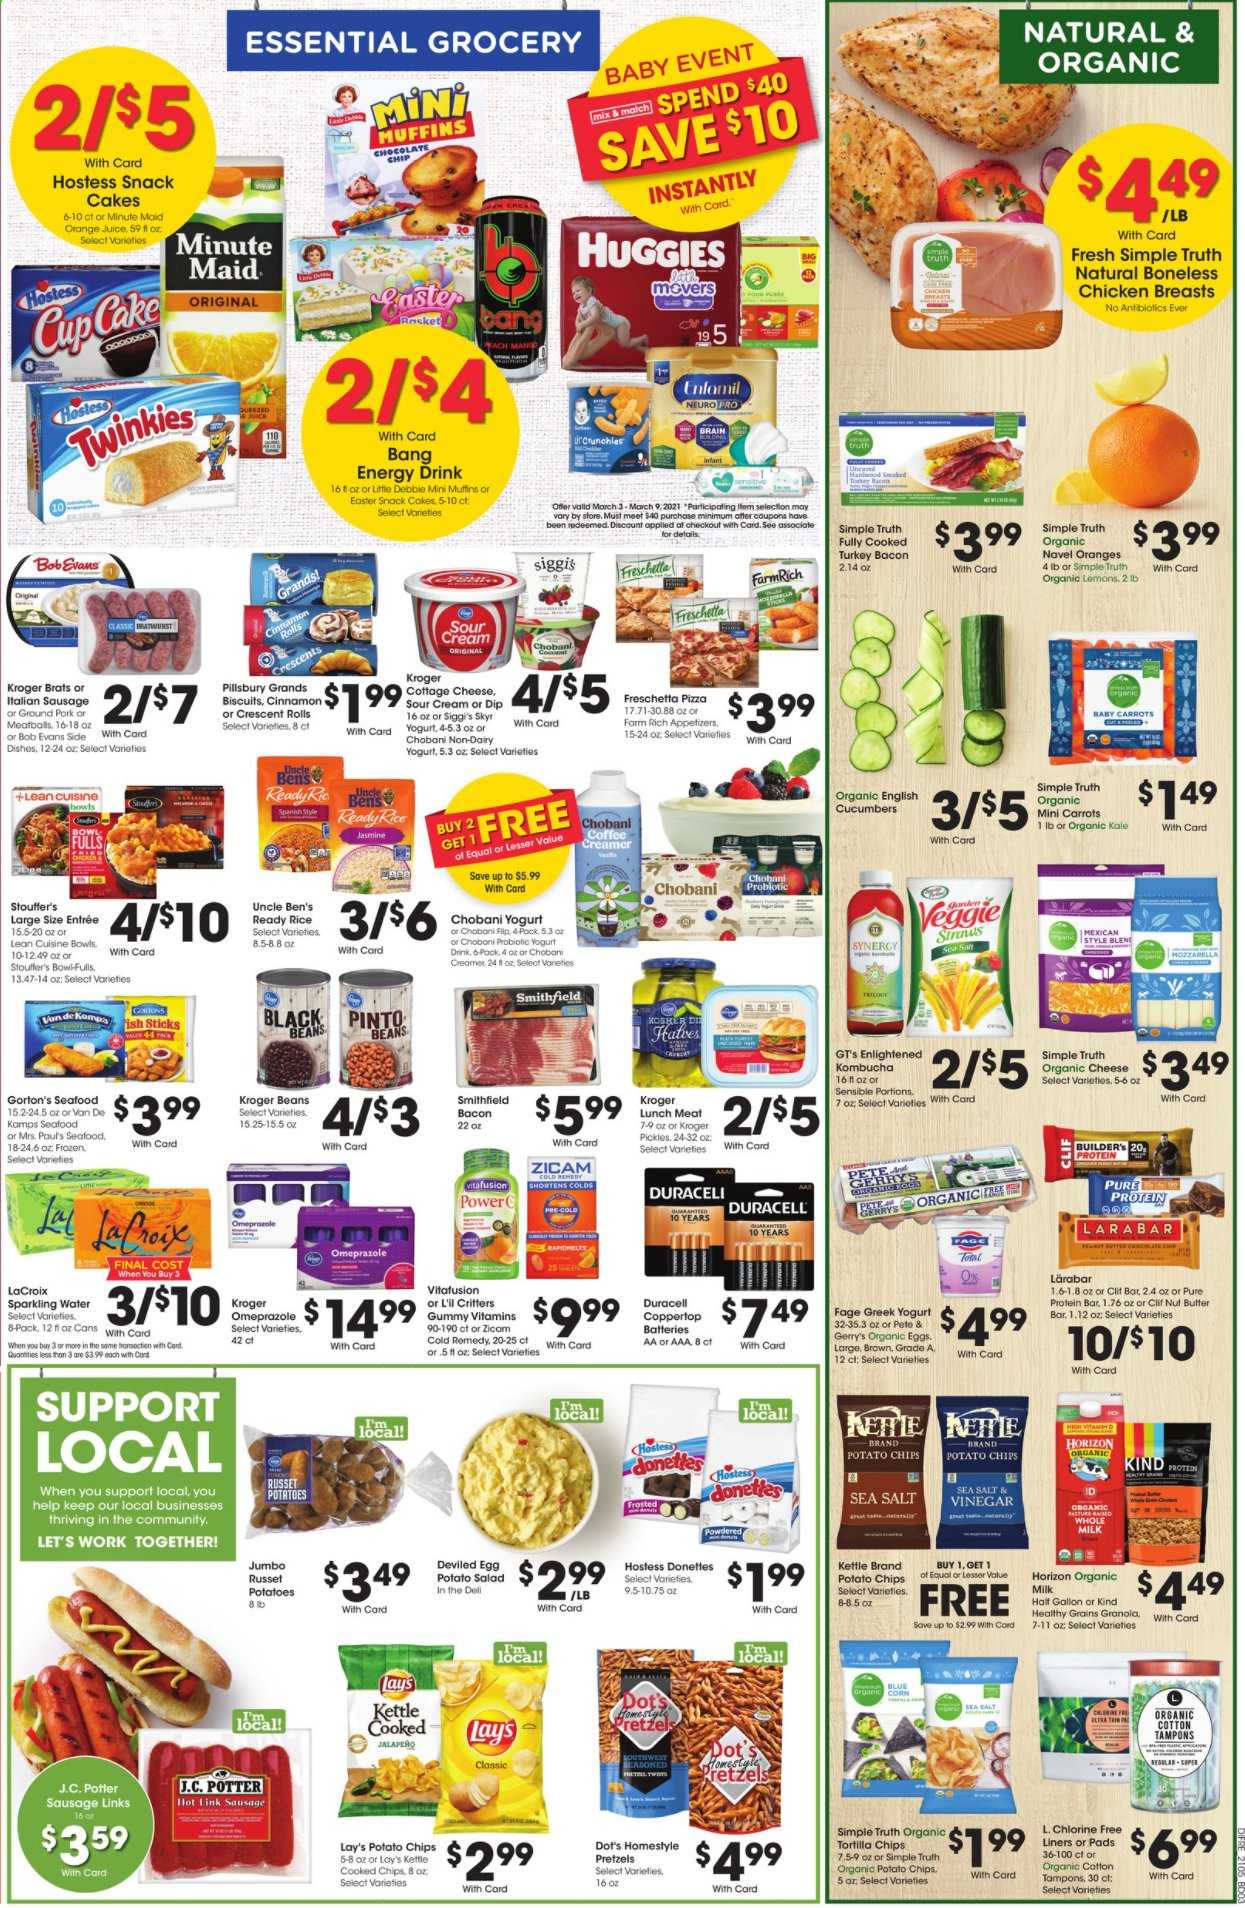 thumbnail - Baker's Flyer - 03/03/2021 - 03/09/2021 - Sales products - pretzels, crescent rolls, cupcake, cake, muffin, seafood, Gorton's, pizza, salad, Pillsbury, Lean Cuisine, bowl-fulls, Bob Evans, bacon, turkey bacon, bratwurst, sausage, italian sausage, potato salad, lunch meat, cottage cheese, cheese, greek yoghurt, yoghurt, Chobani, organic milk, eggs, sour cream, creamer, dip, Enlightened lce Cream, beans, carrots, pickles, Stouffer's, chocolate, biscuit, tortilla chips, potato chips, snack, Lay’s, cucumber, jalapeño, Uncle Ben's, granola, protein bar, rice, pinto beans, cinnamon, nut butter, orange juice, juice, energy drink, sparkling water, kombucha, coffee, chicken breasts, ground pork, Huggies, tampons, cup, battery, Duracell, gallon, Vitafusion. Page 5.